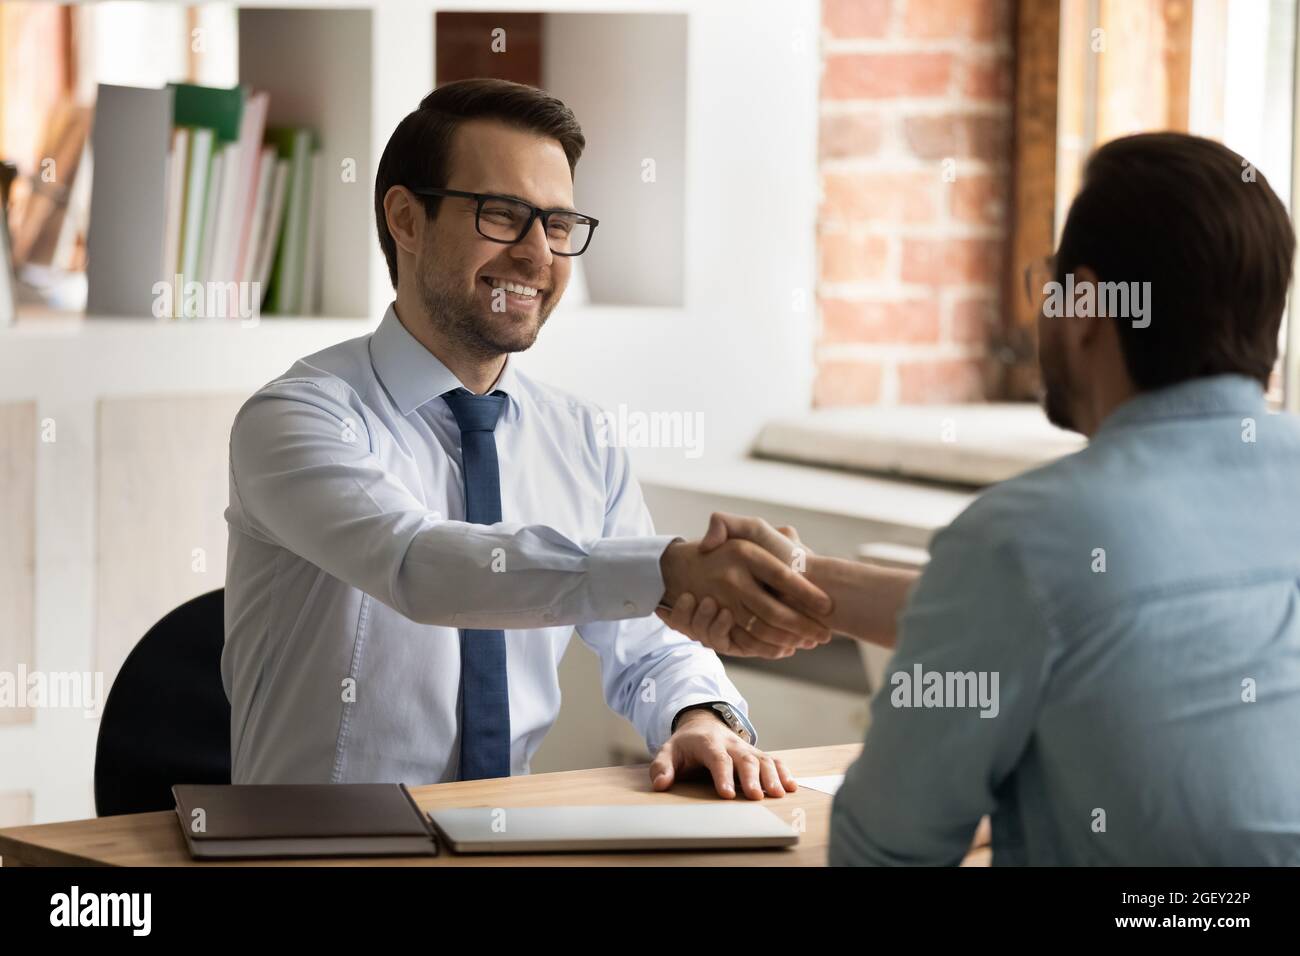 HR manager start job interview handshakes company position candidate Stock Photo